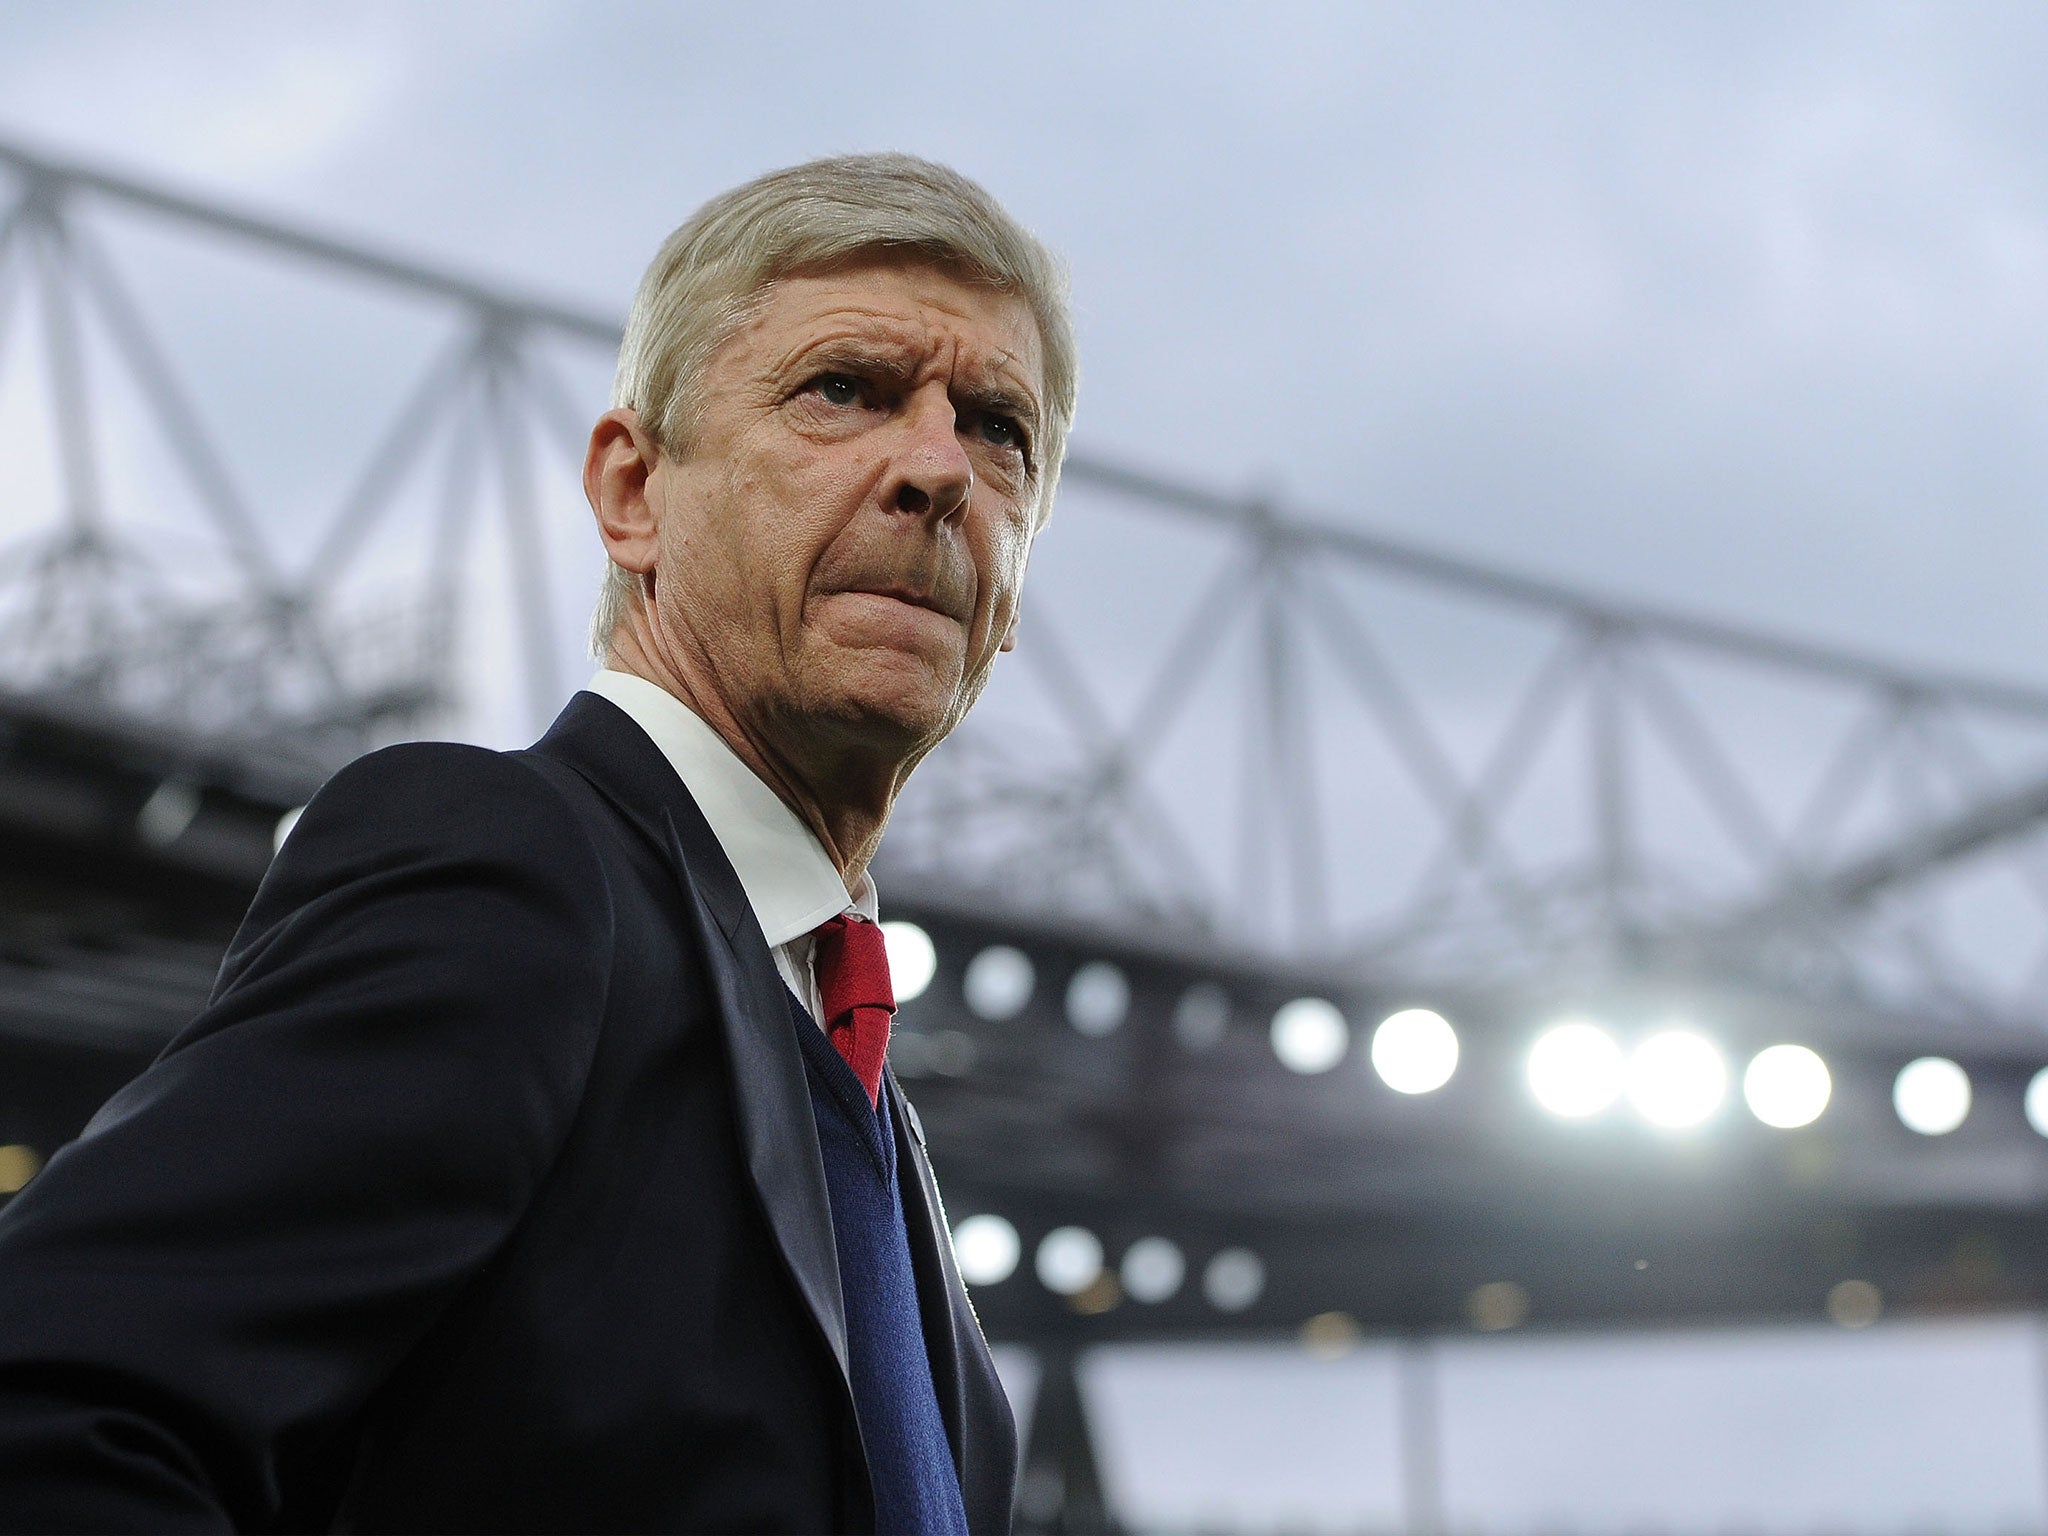 Wenger admitted that confidence drops when results don't go the right way